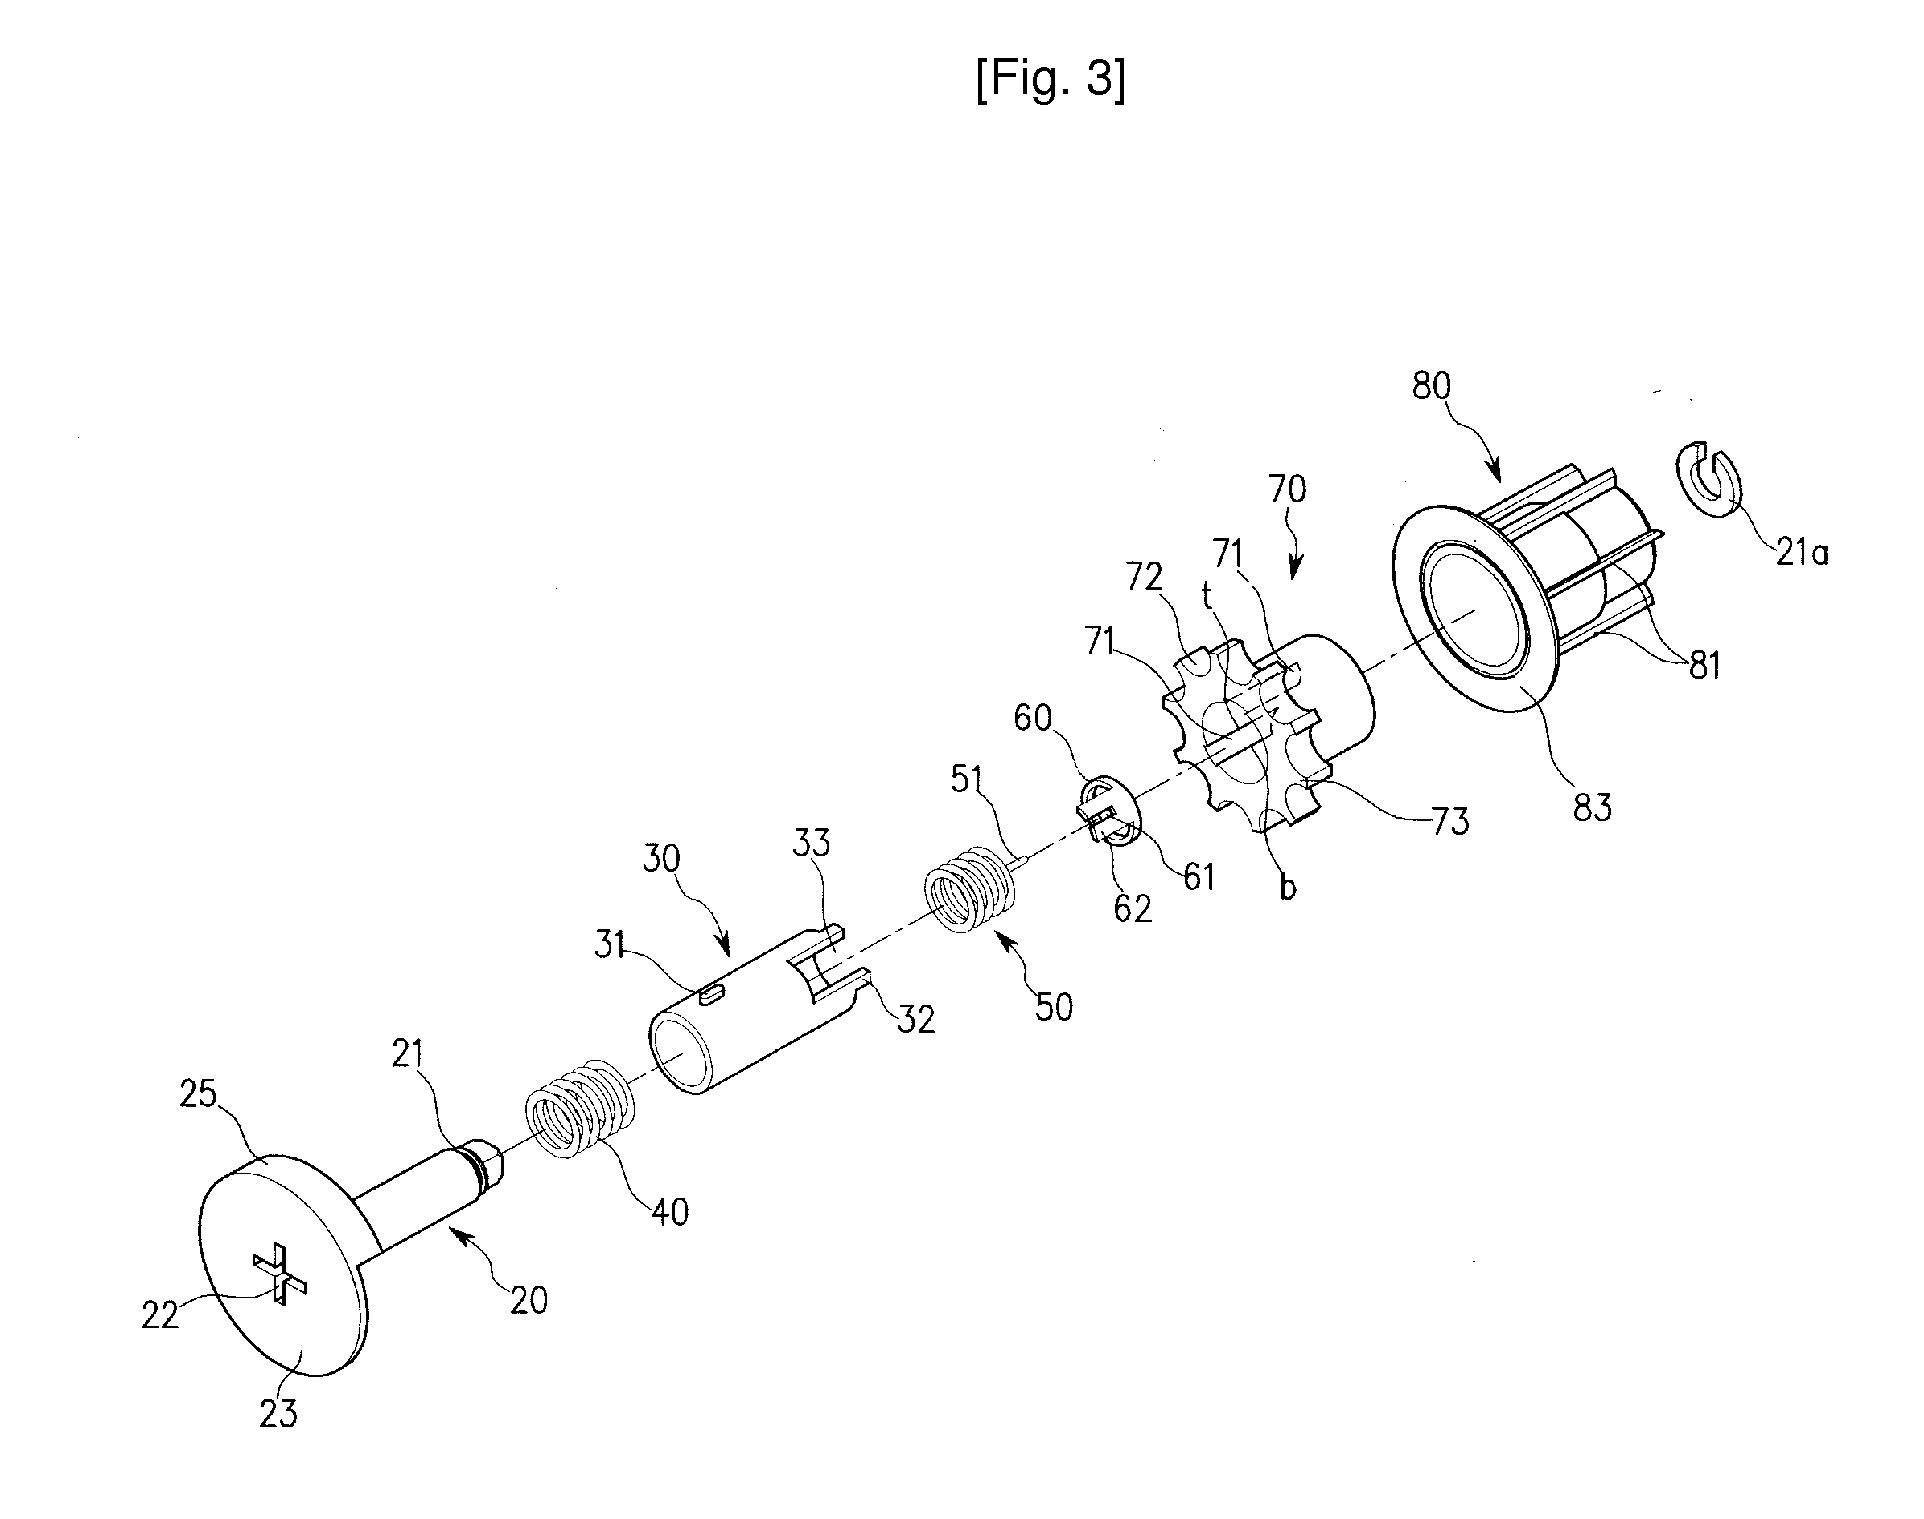 Automatic Movement Ascent Device Gear of Roll Screen